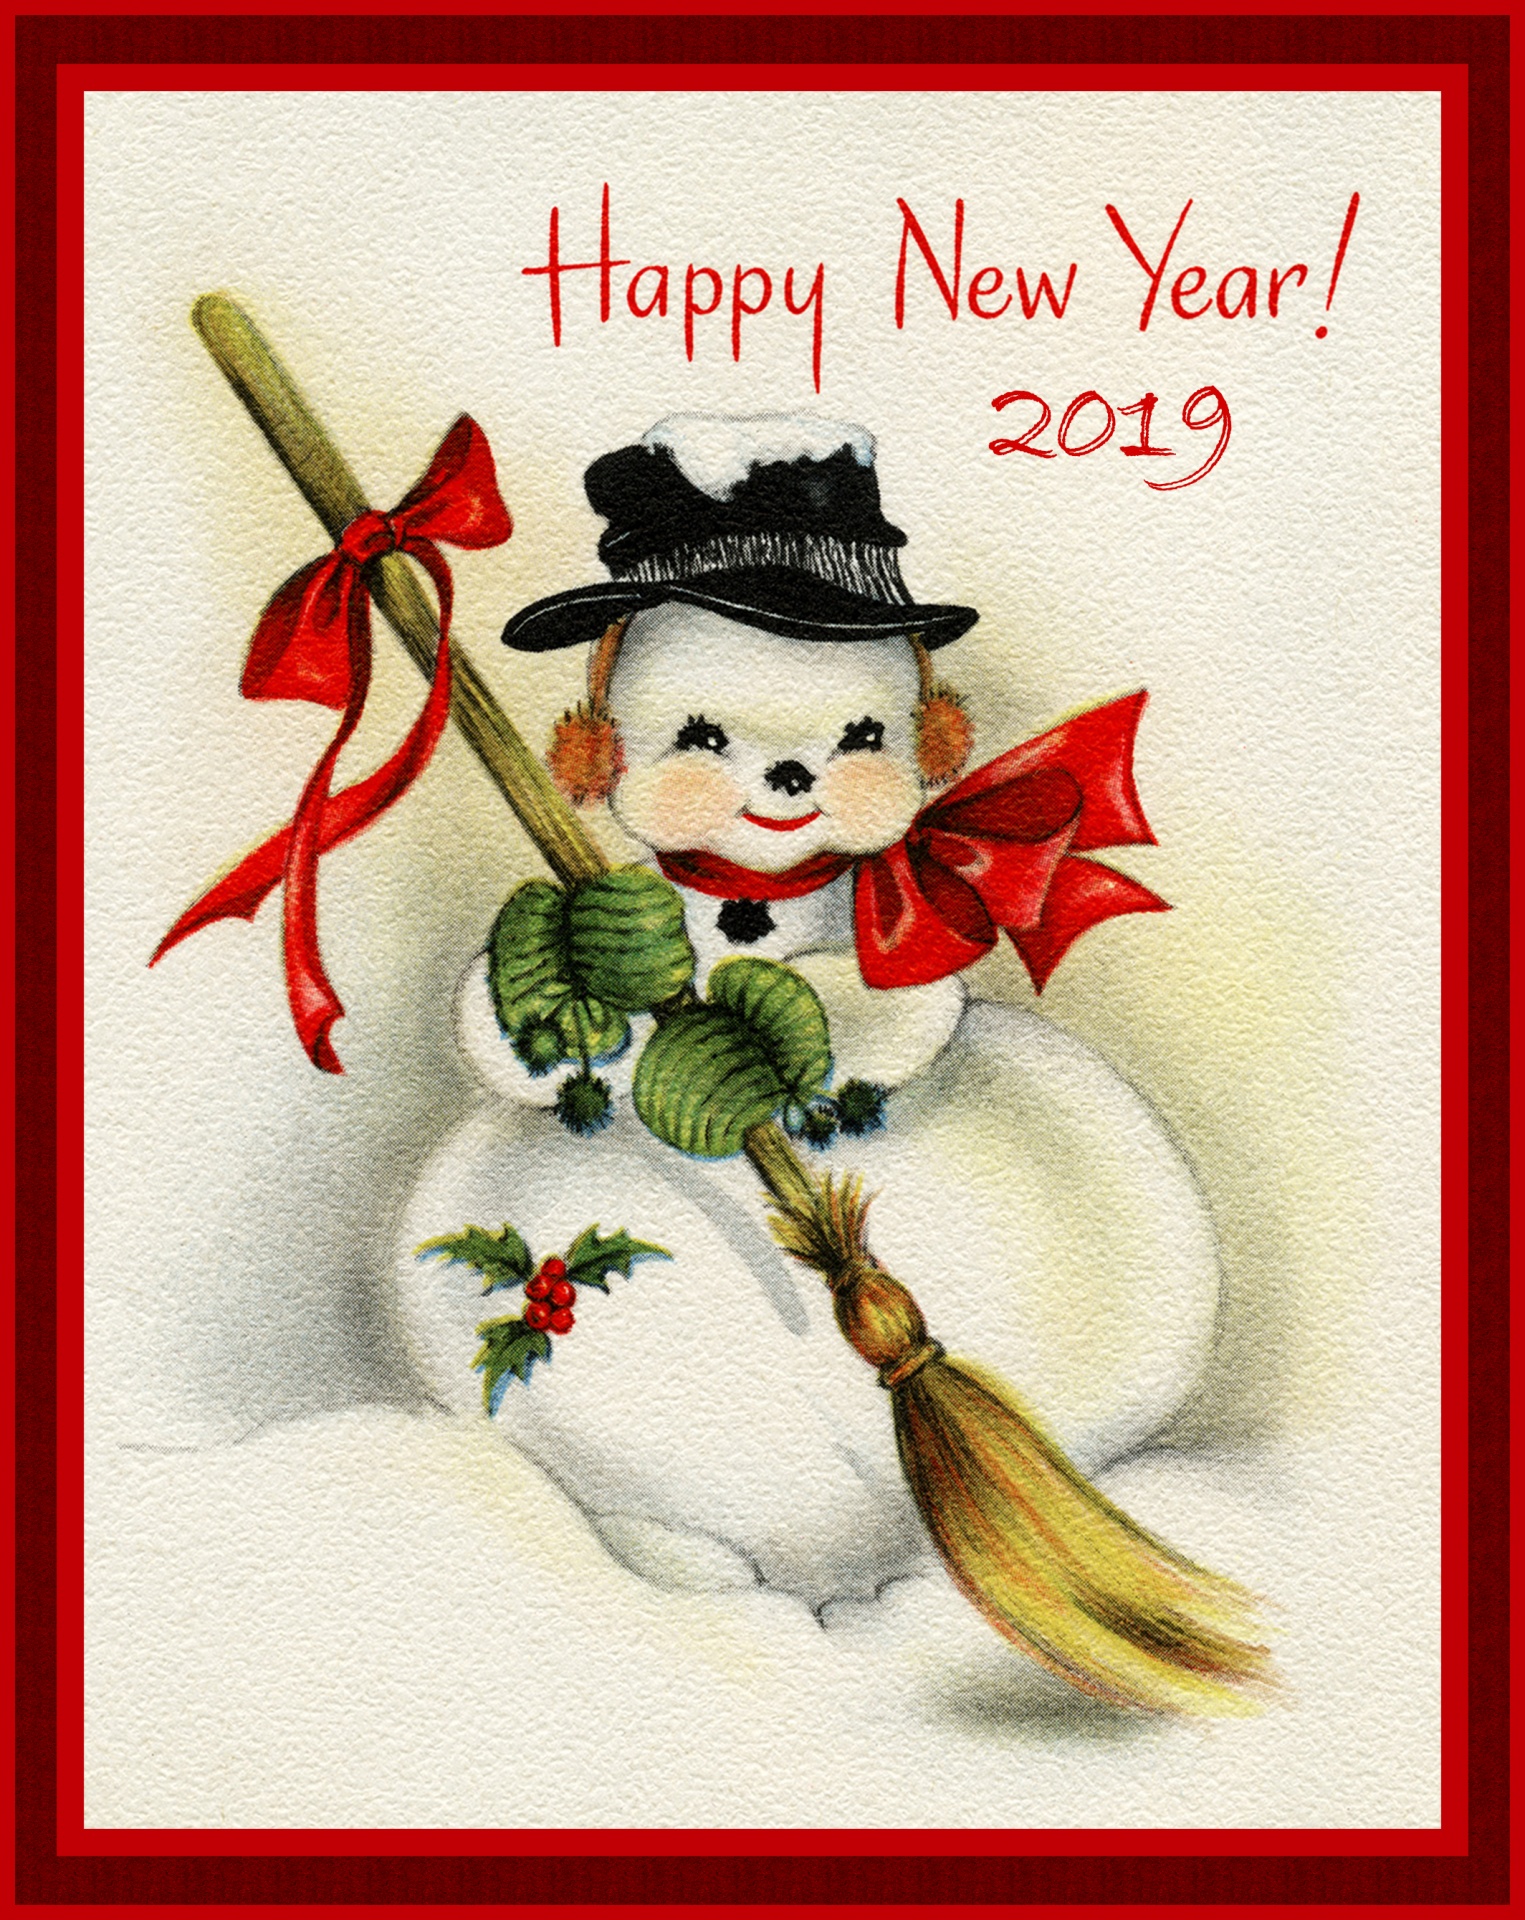 2019-new-year-snowman-card-free-stock-photo-public-domain-pictures